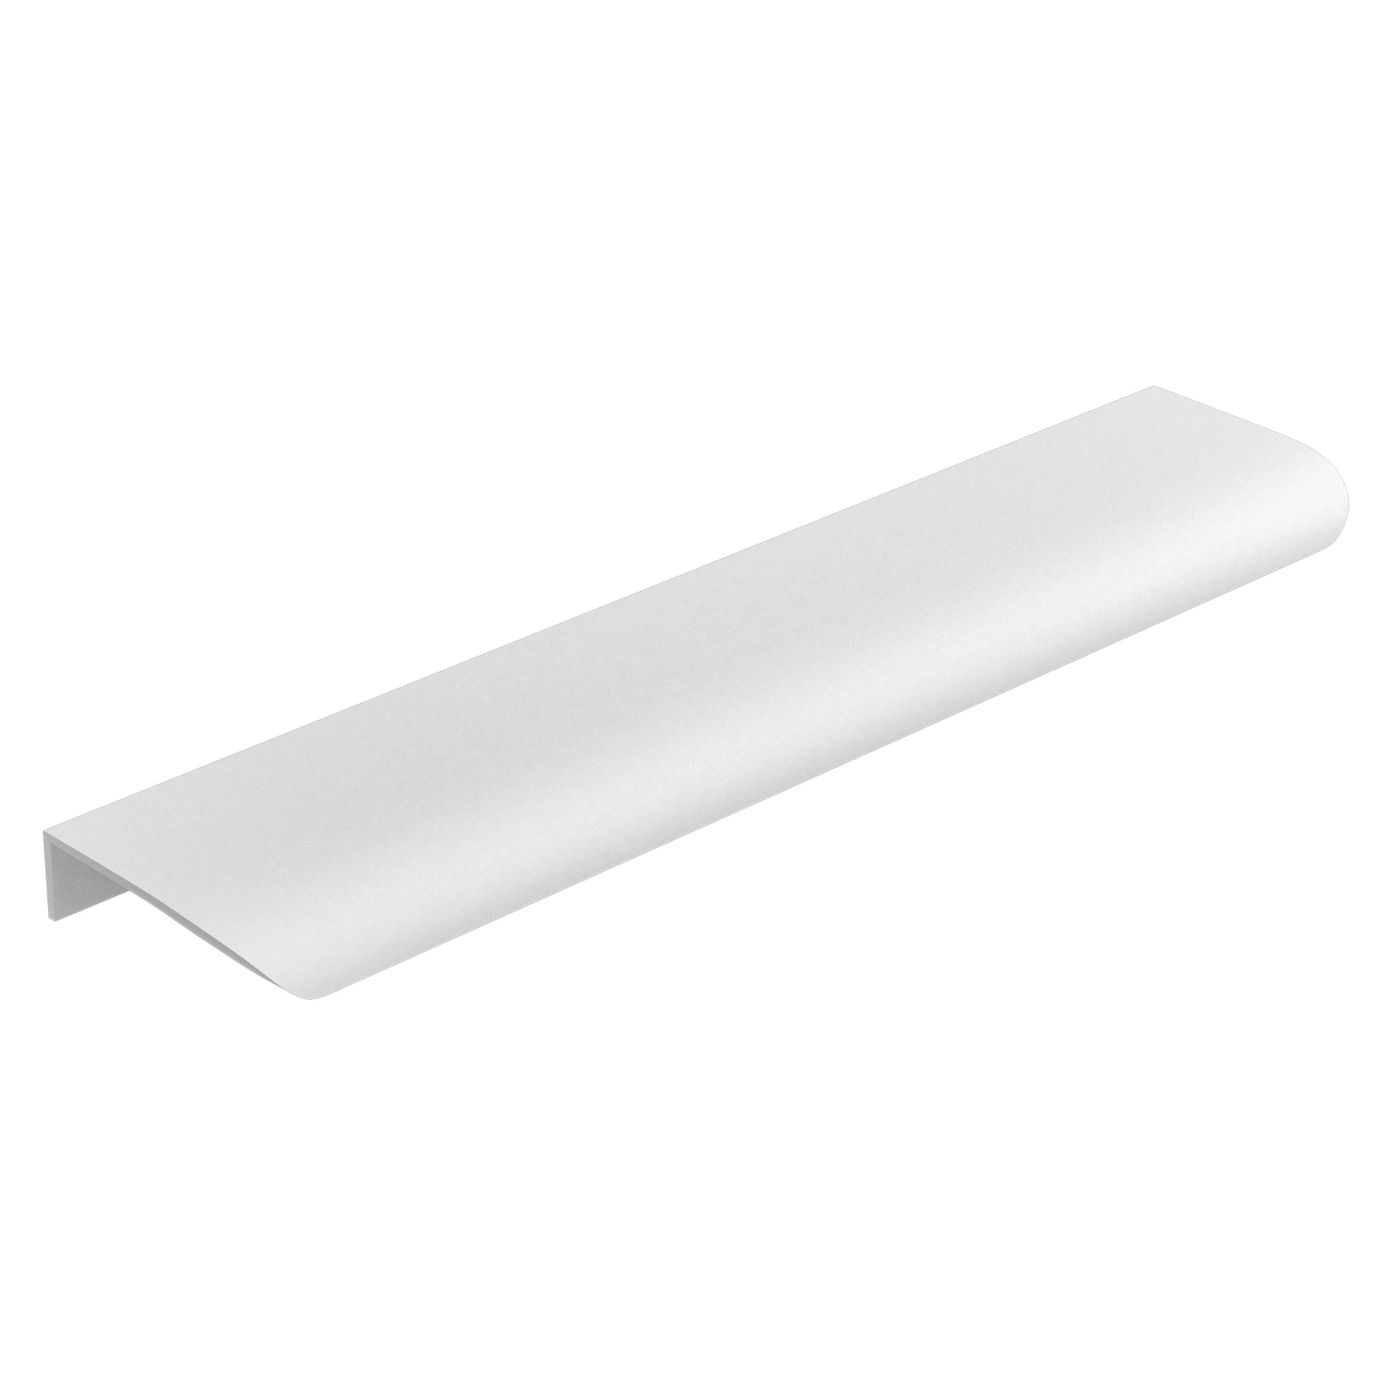 Hampshire 200mm White Handle for 750, 900, 1200, 1500, 1800 Cabinets